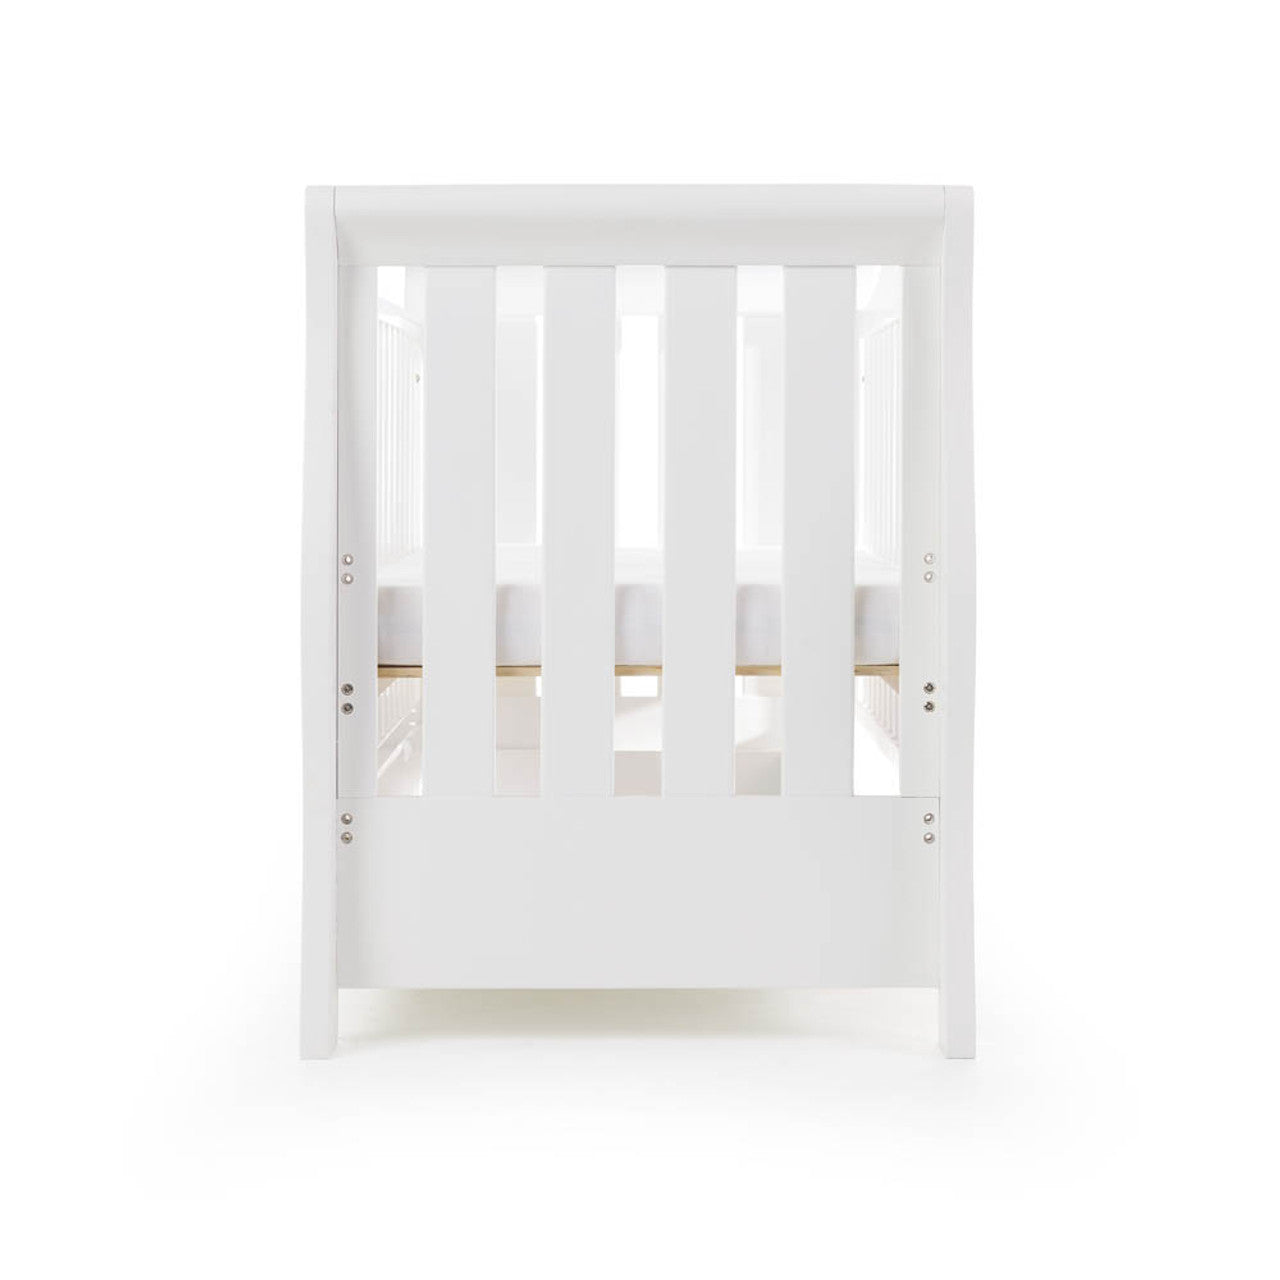 Obaby Stamford Luxe Sleigh Cot Bed